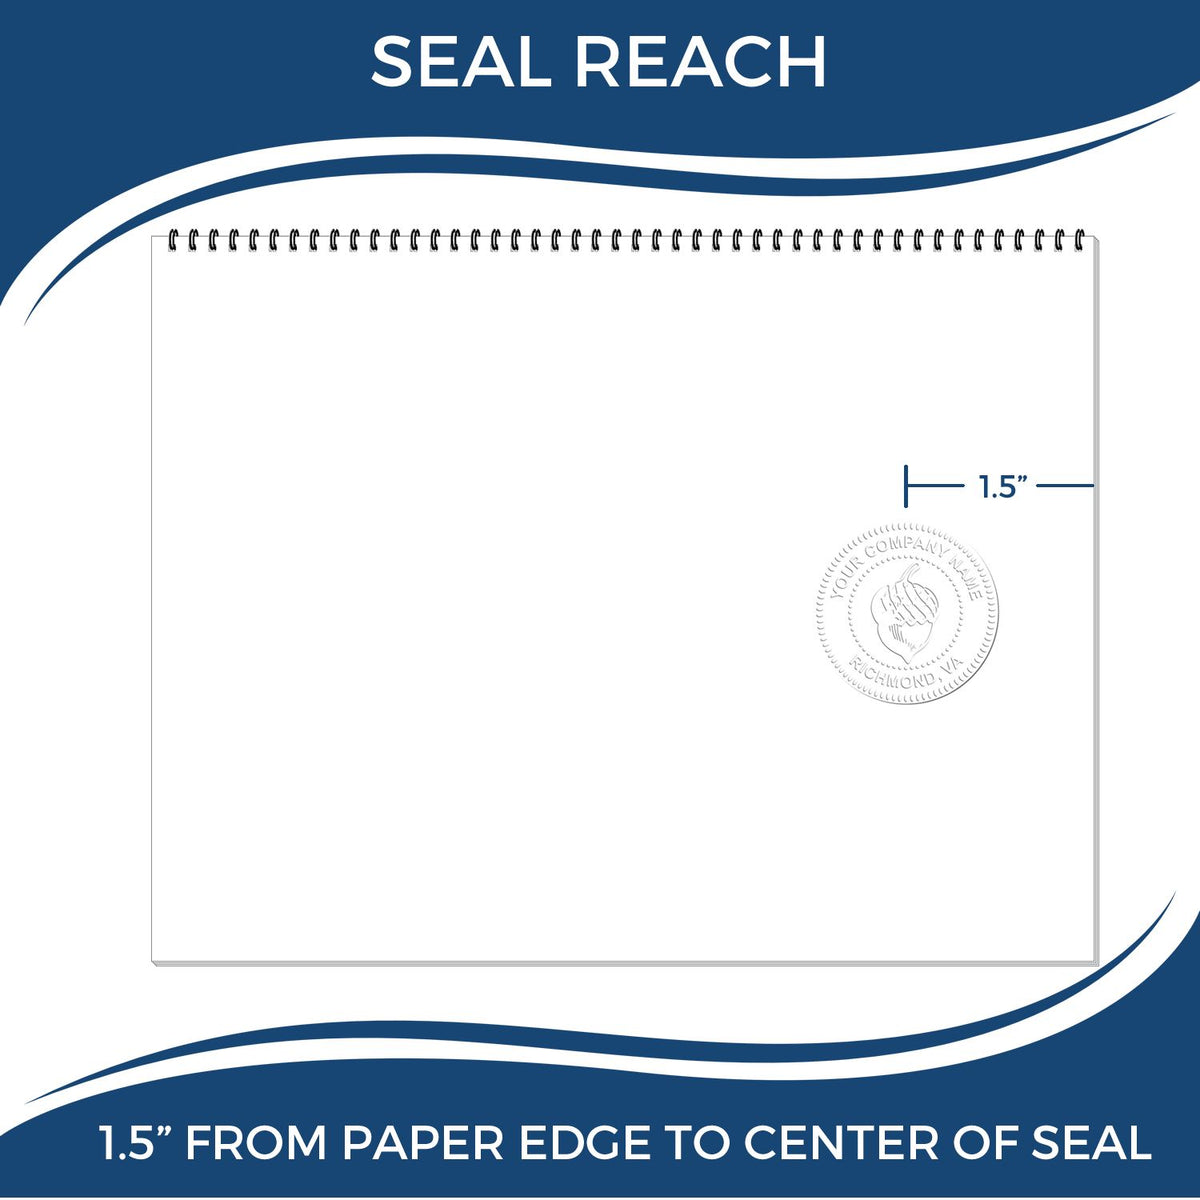 An infographic showing the seal reach which is represented by a ruler and a miniature seal image of the Gift Washington Architect Seal